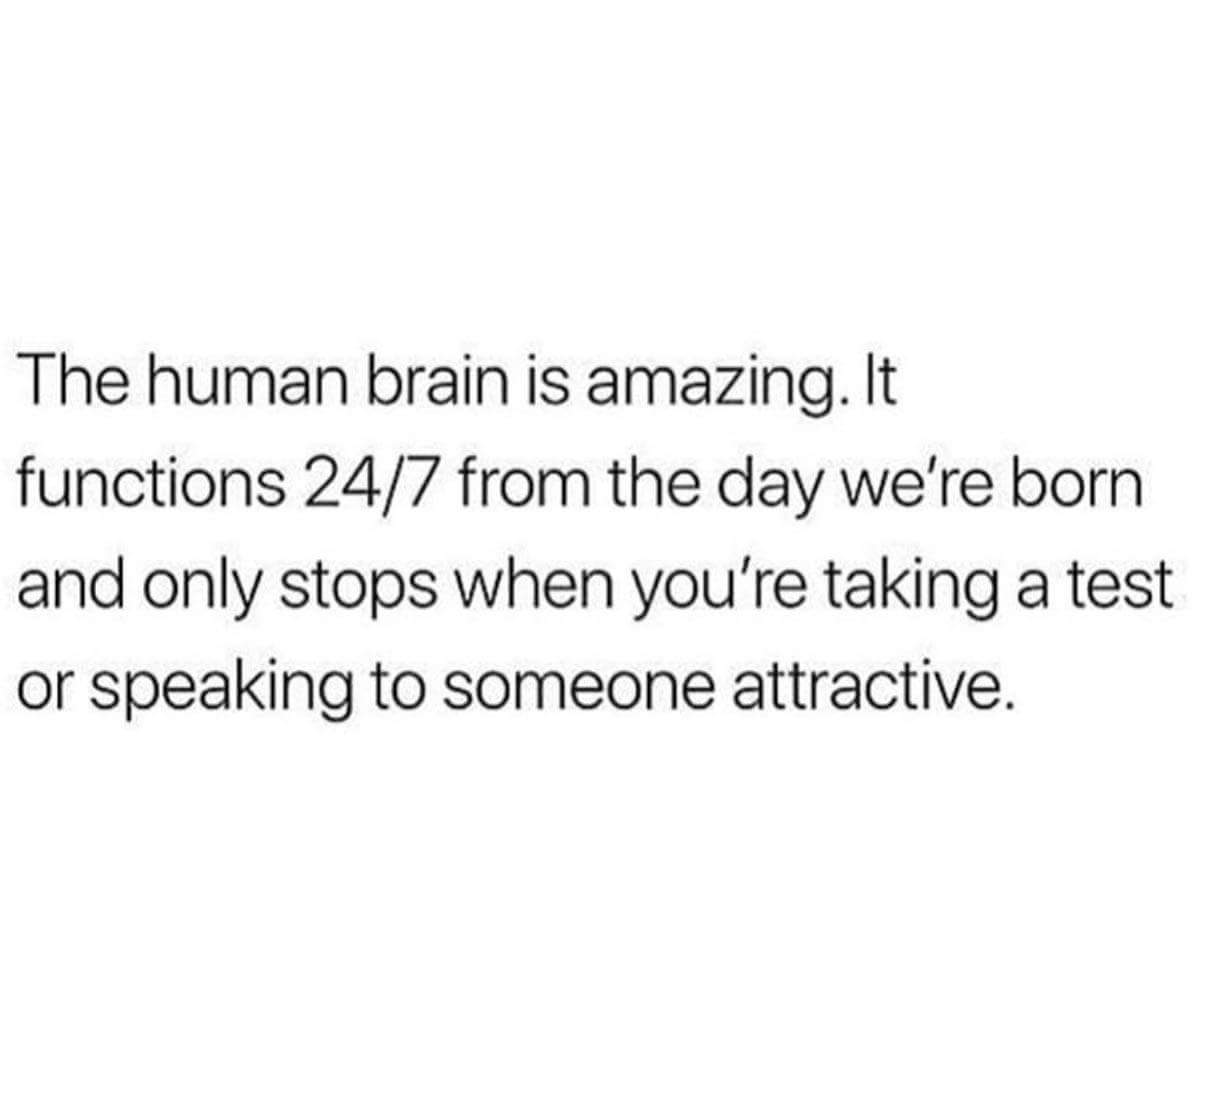 shoutout to myself quotes - The human brain is amazing. It functions 247 from the day we're born and only stops when you're taking a test or speaking to someone attractive.